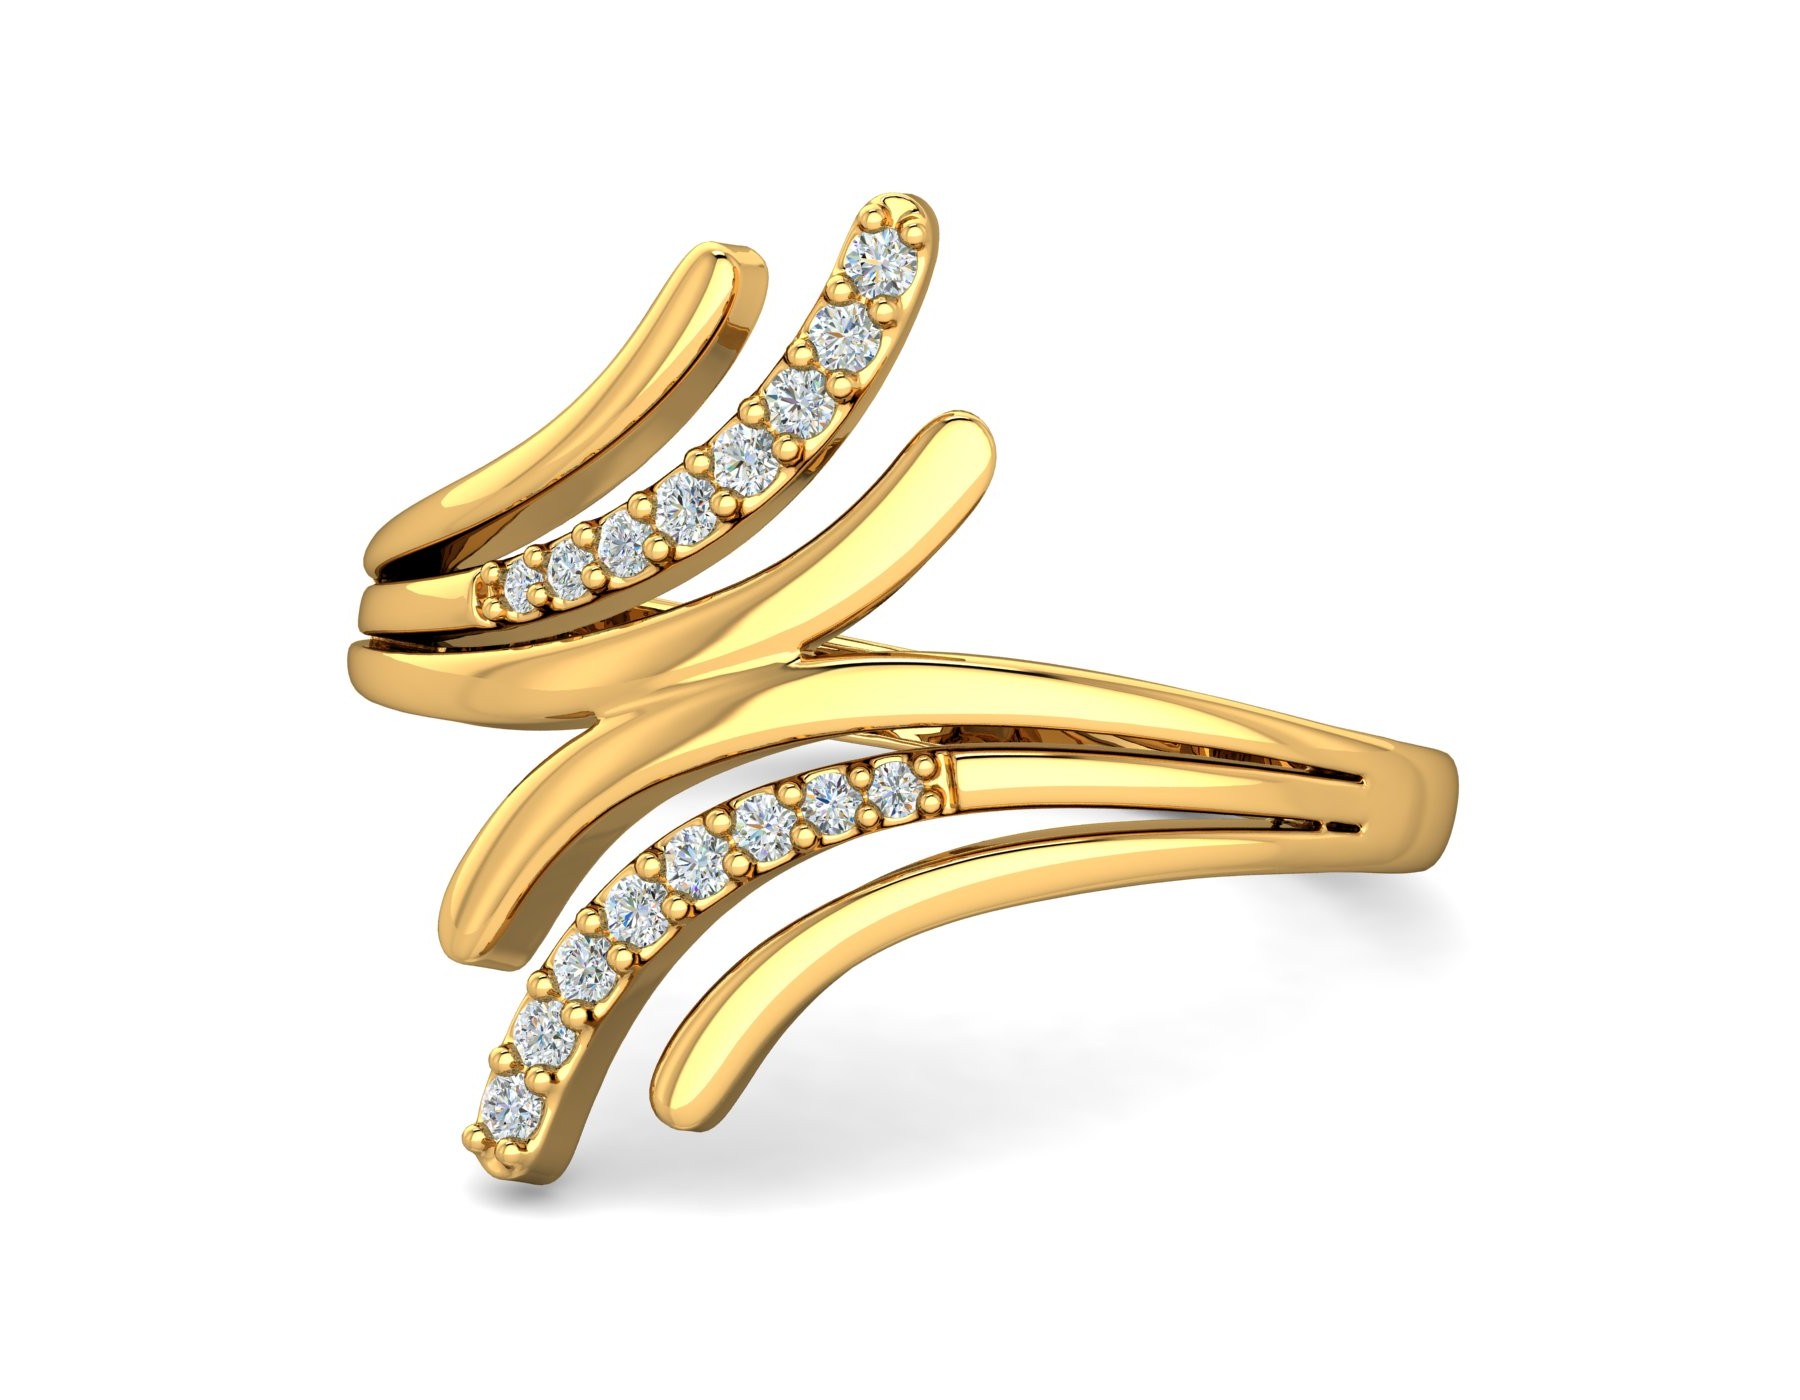 Female Plain Leaf Pattern Ladies Gold Ring, 5.2g at Rs 120000 in New Delhi